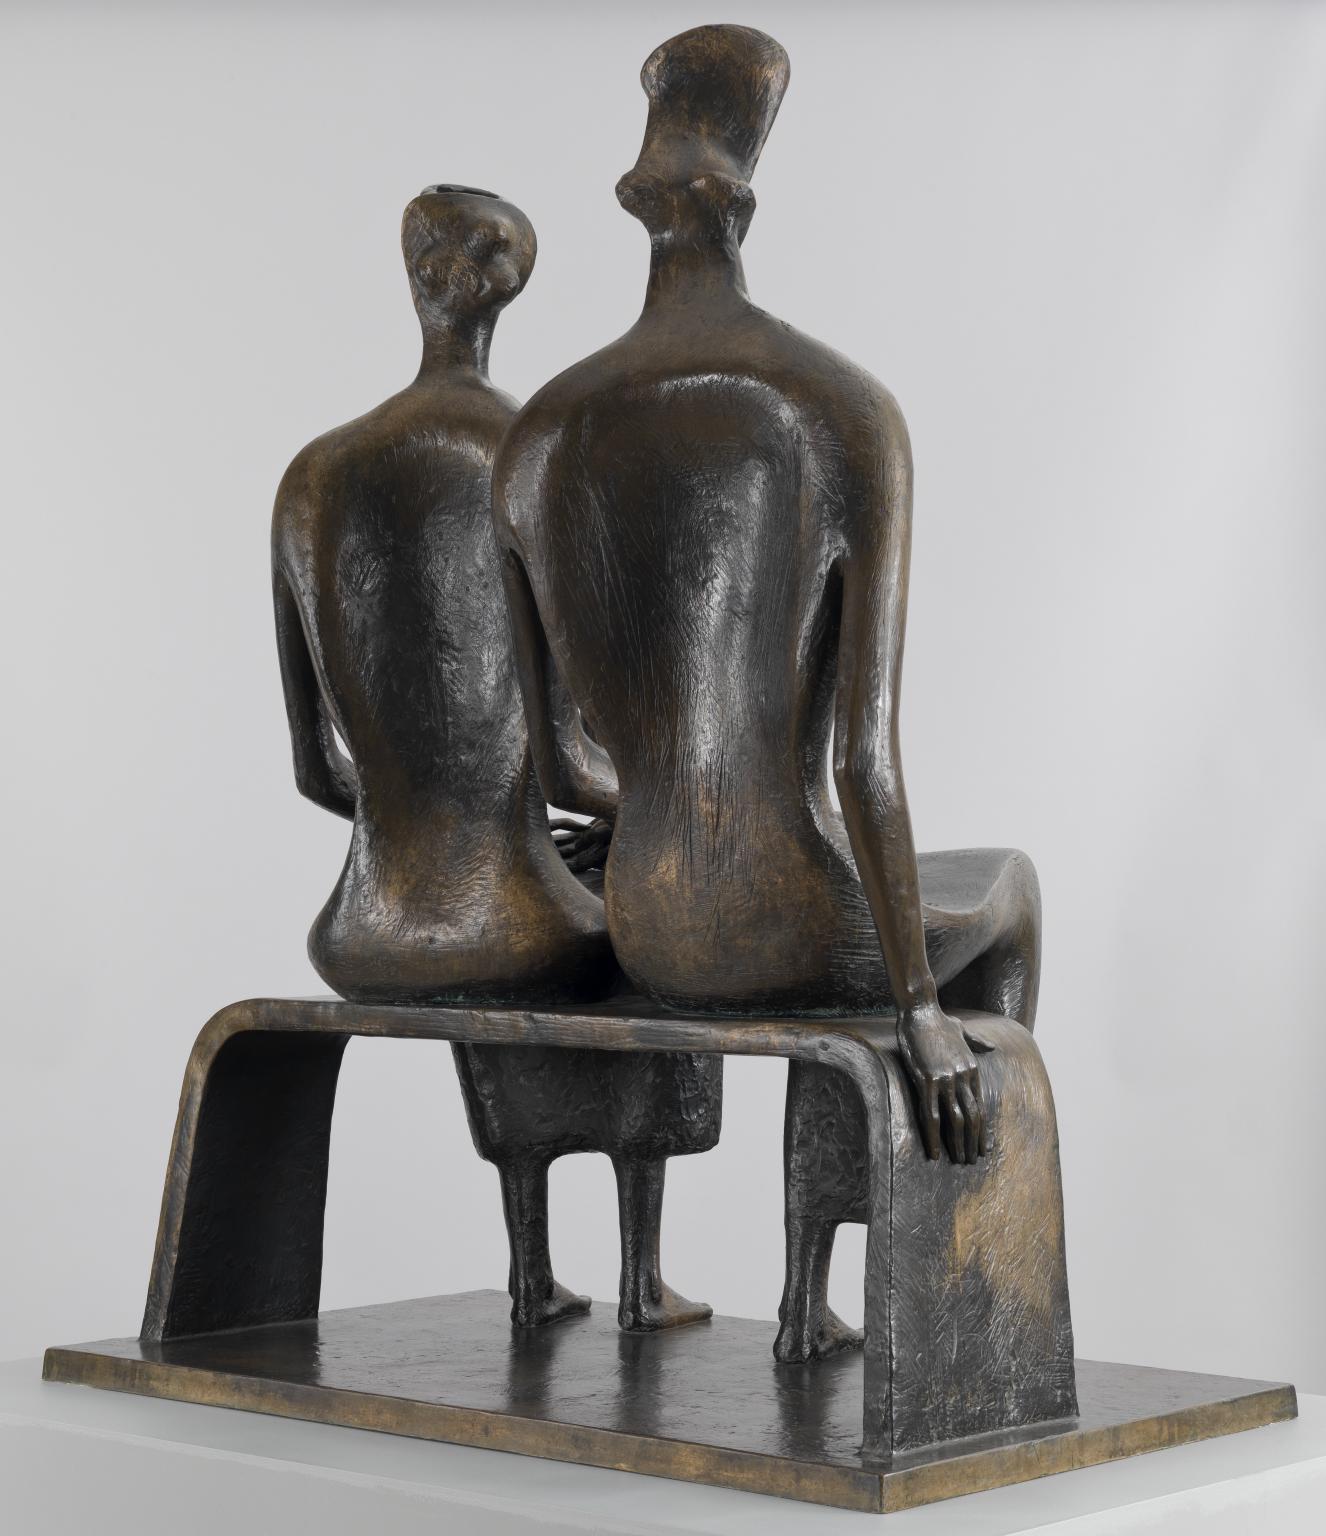 King and Queen', Henry Moore OM, CH, 1952-3, cast 1957 | Tate